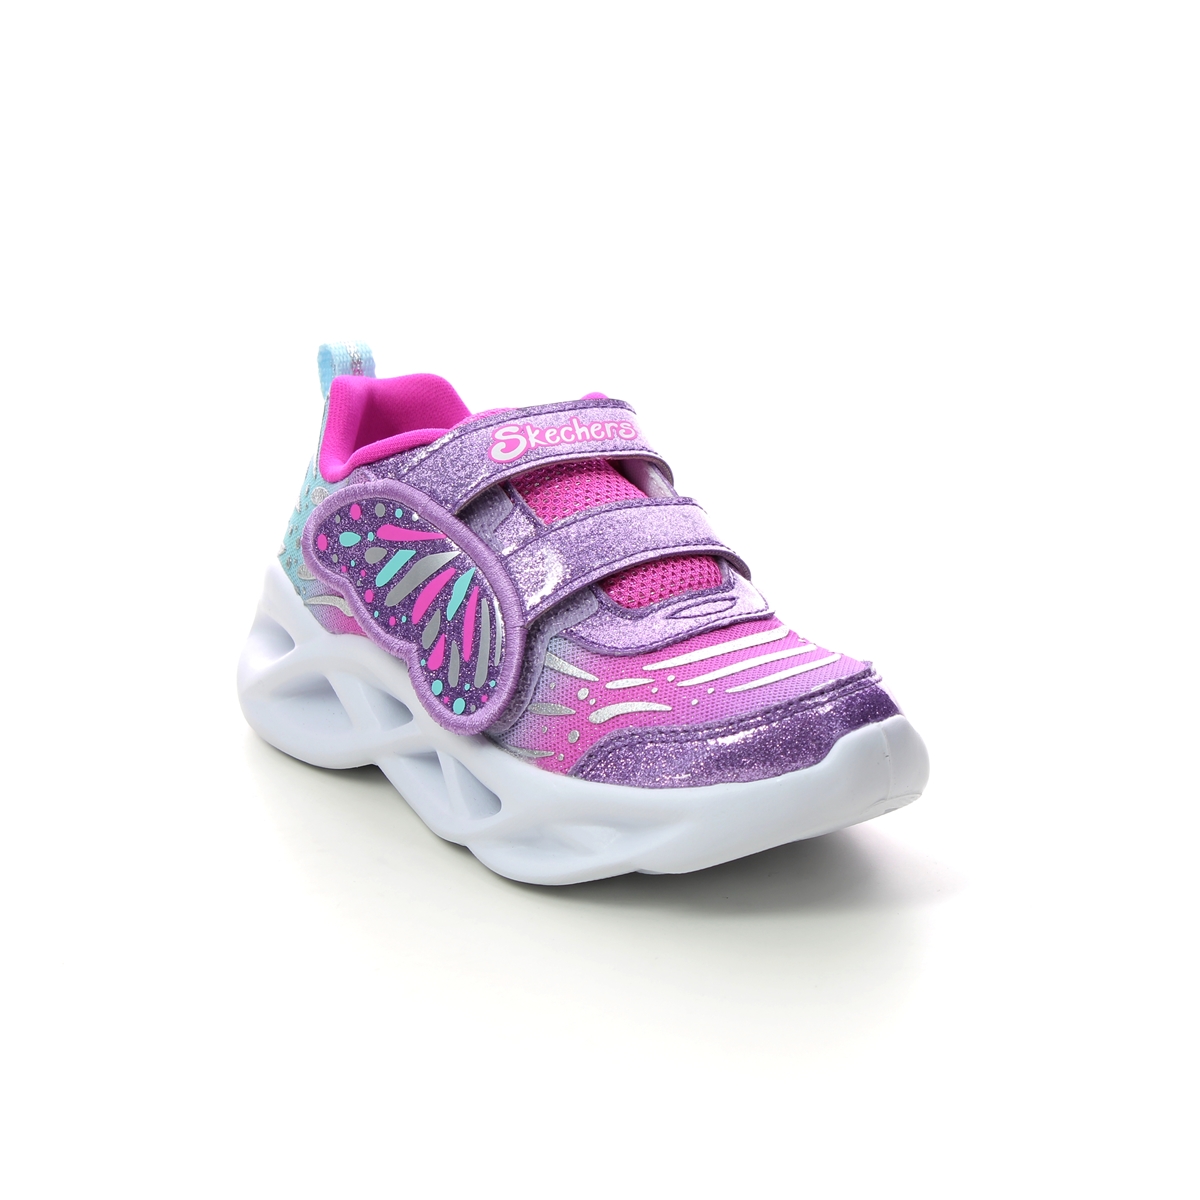 Skechers Twisty Brights Pink Kids Girls Trainers 302754N In Size 23 In Plain Pink For kids